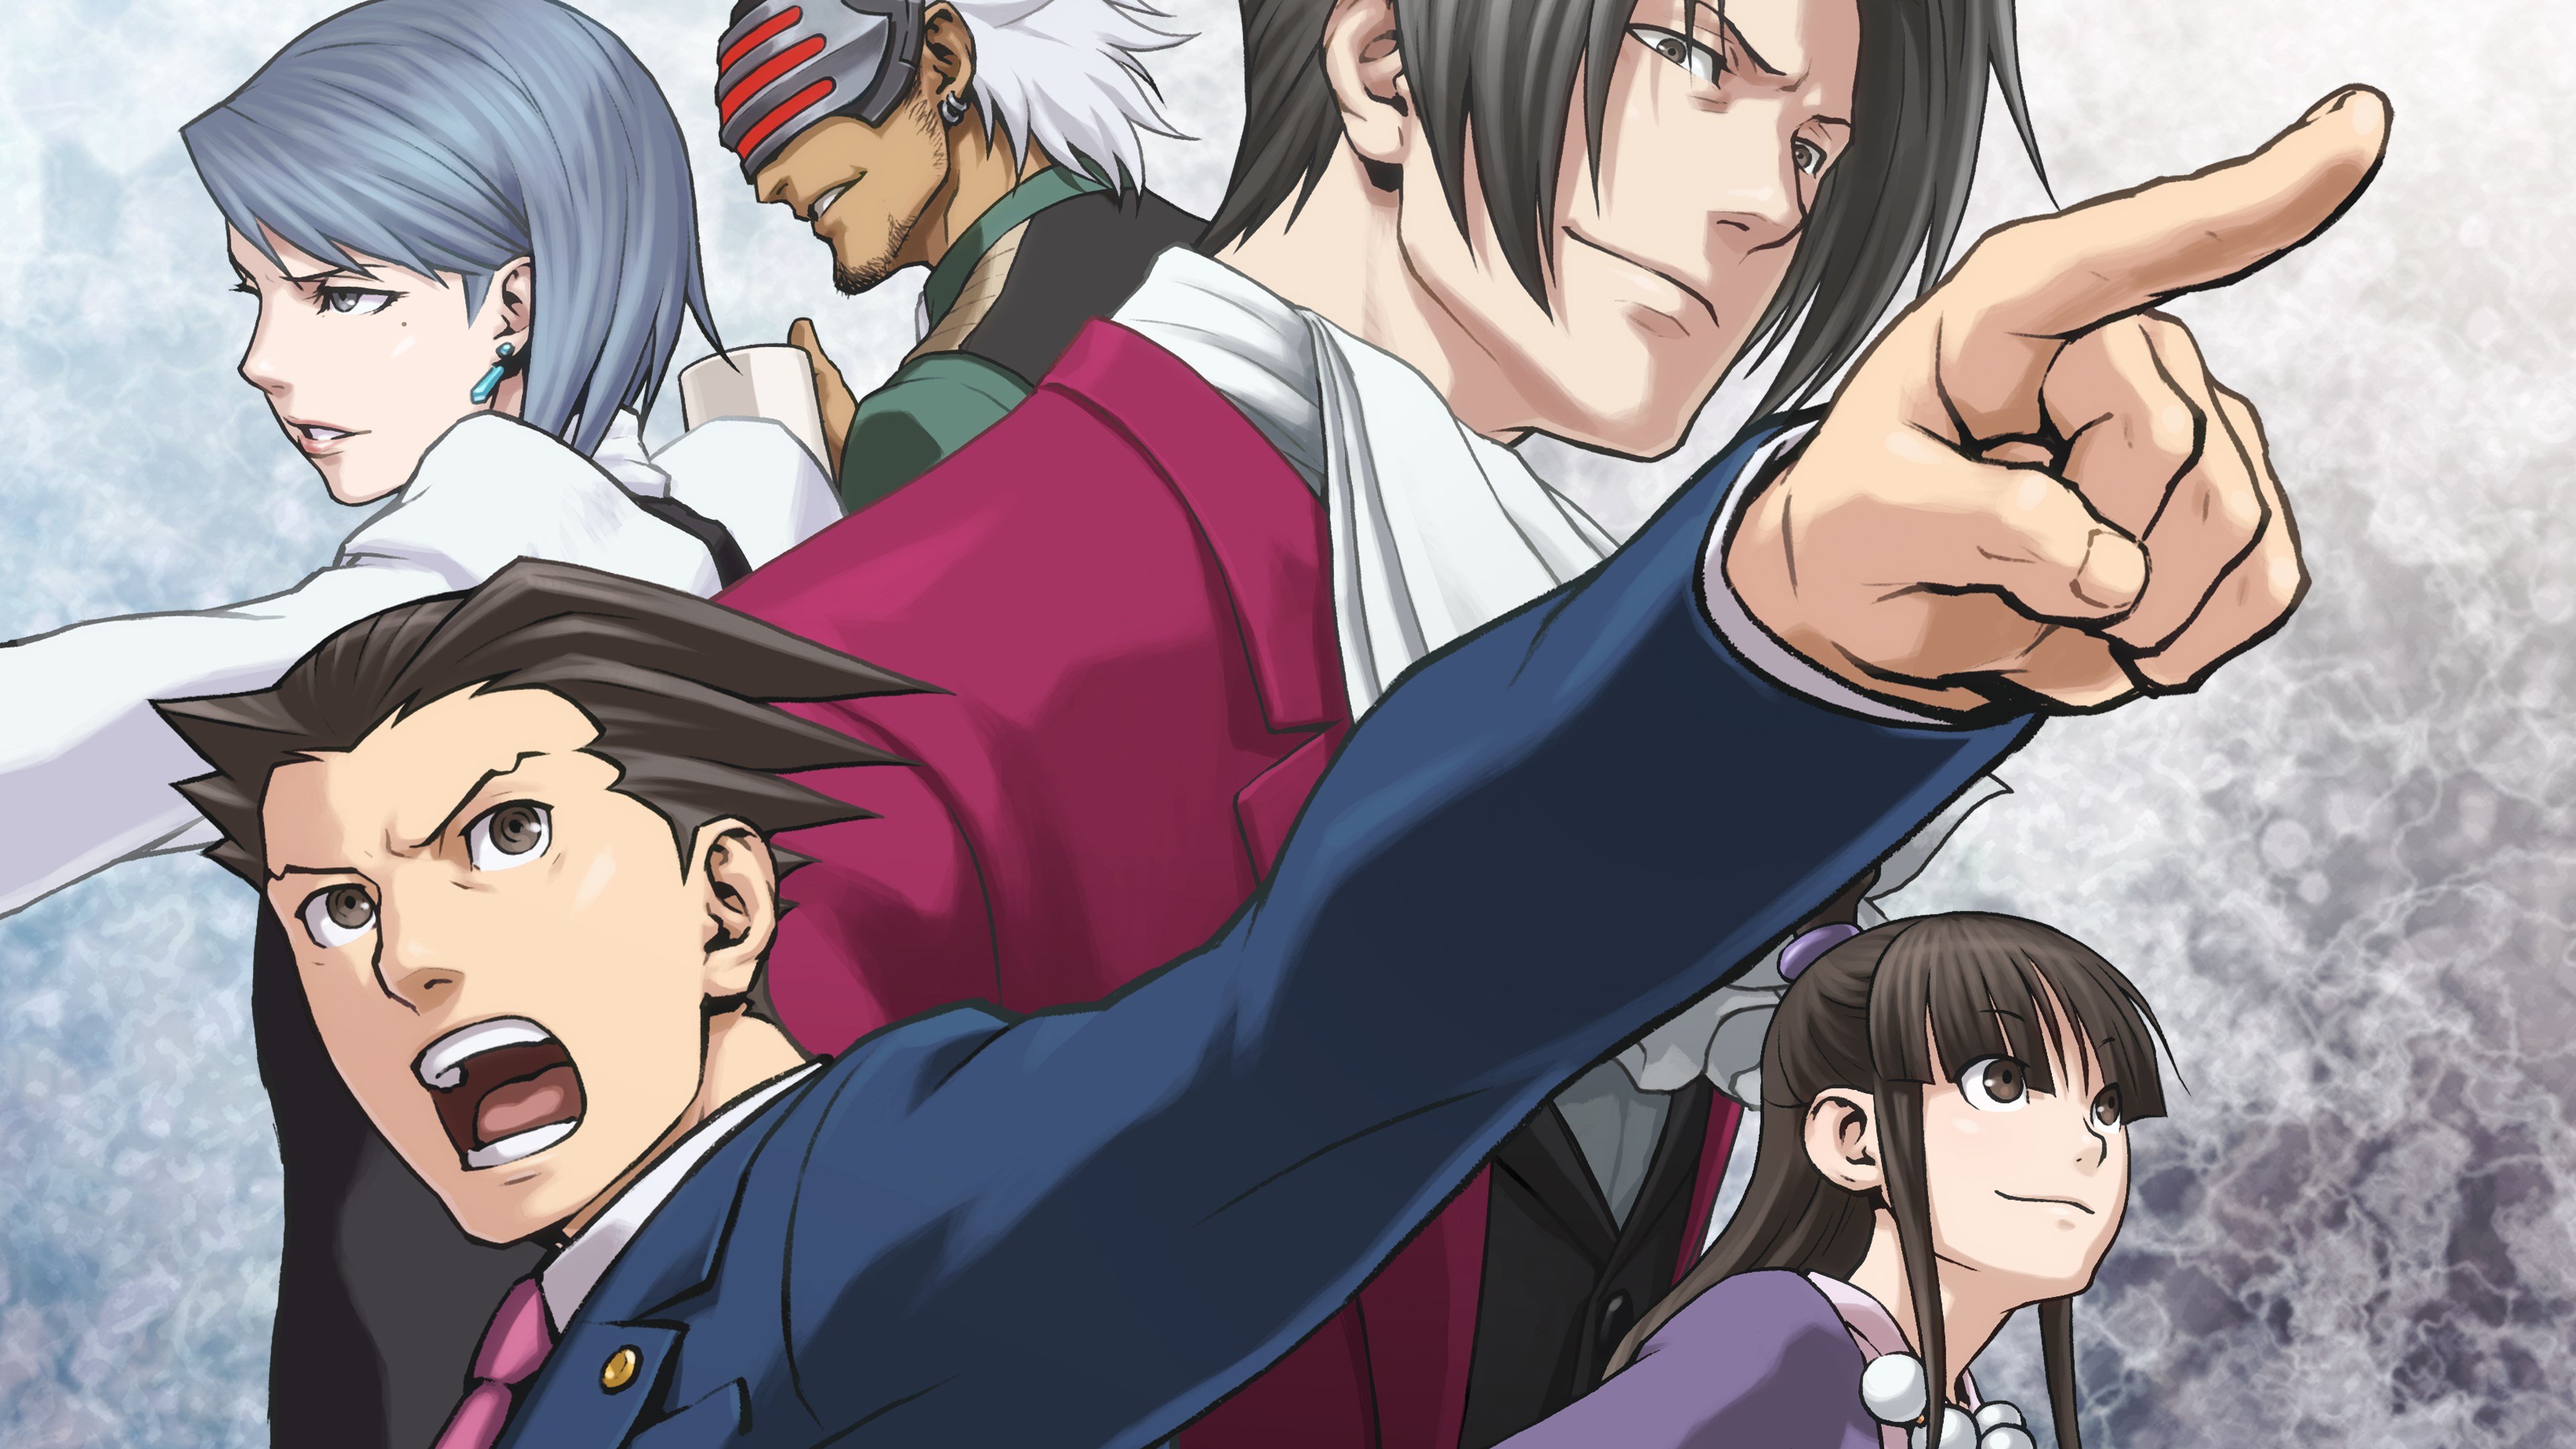 Phoenix Wright: Ace Attorney Trilogy cover image